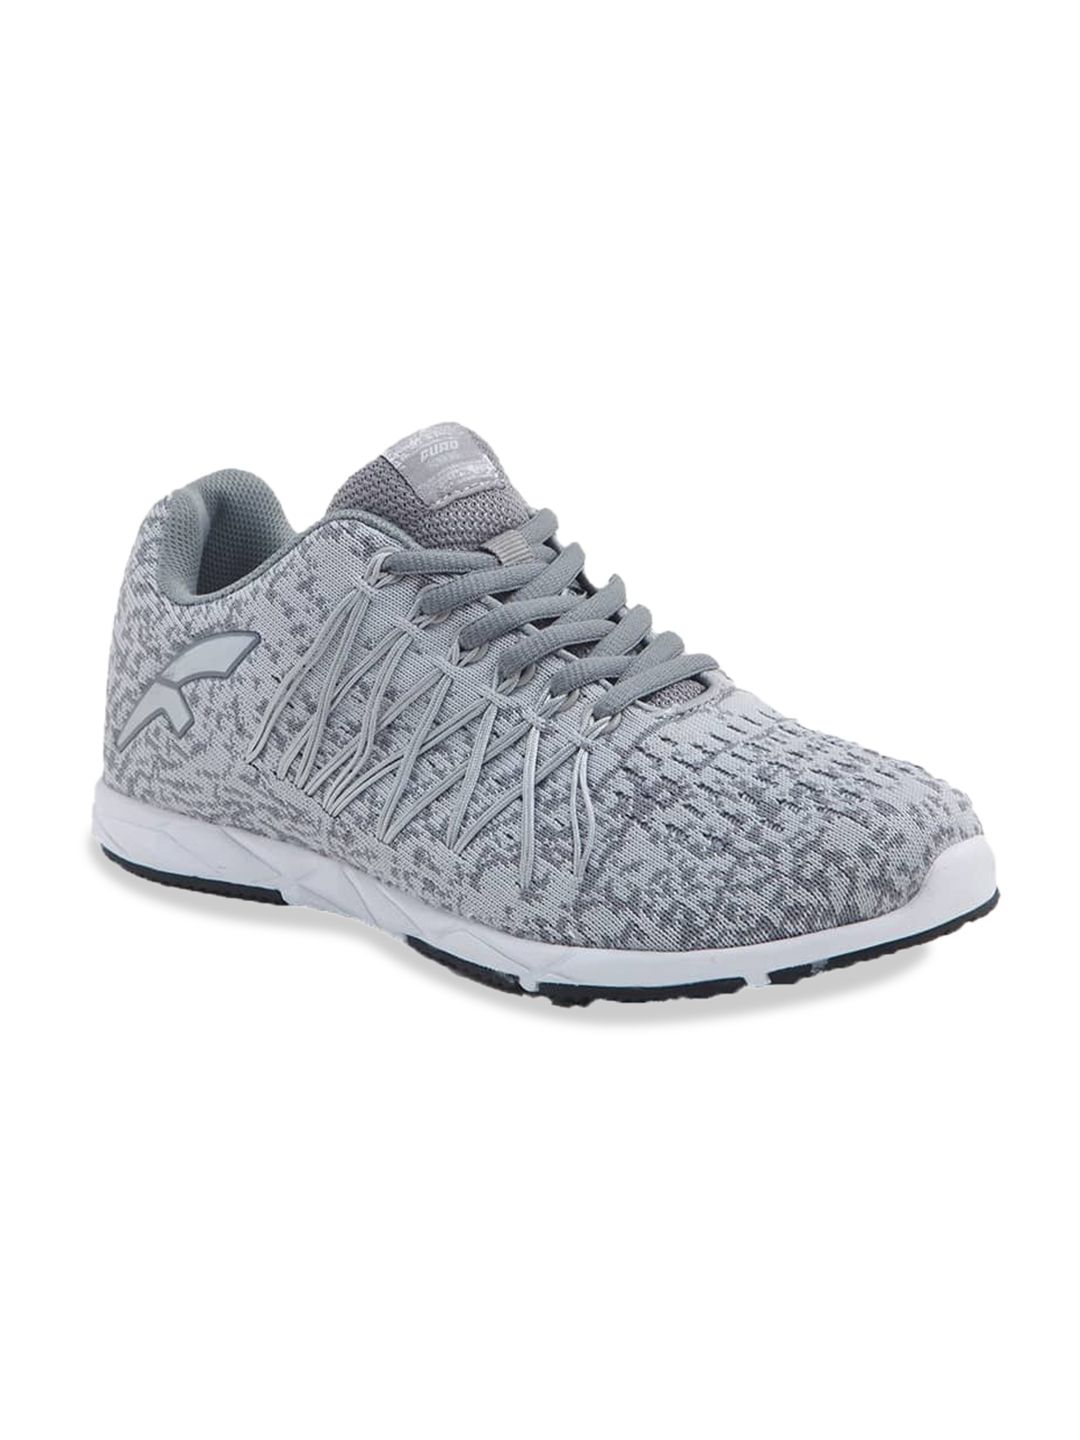 FURO by Red Chief Women Grey Mesh Running Non-Marking Shoes Price in India